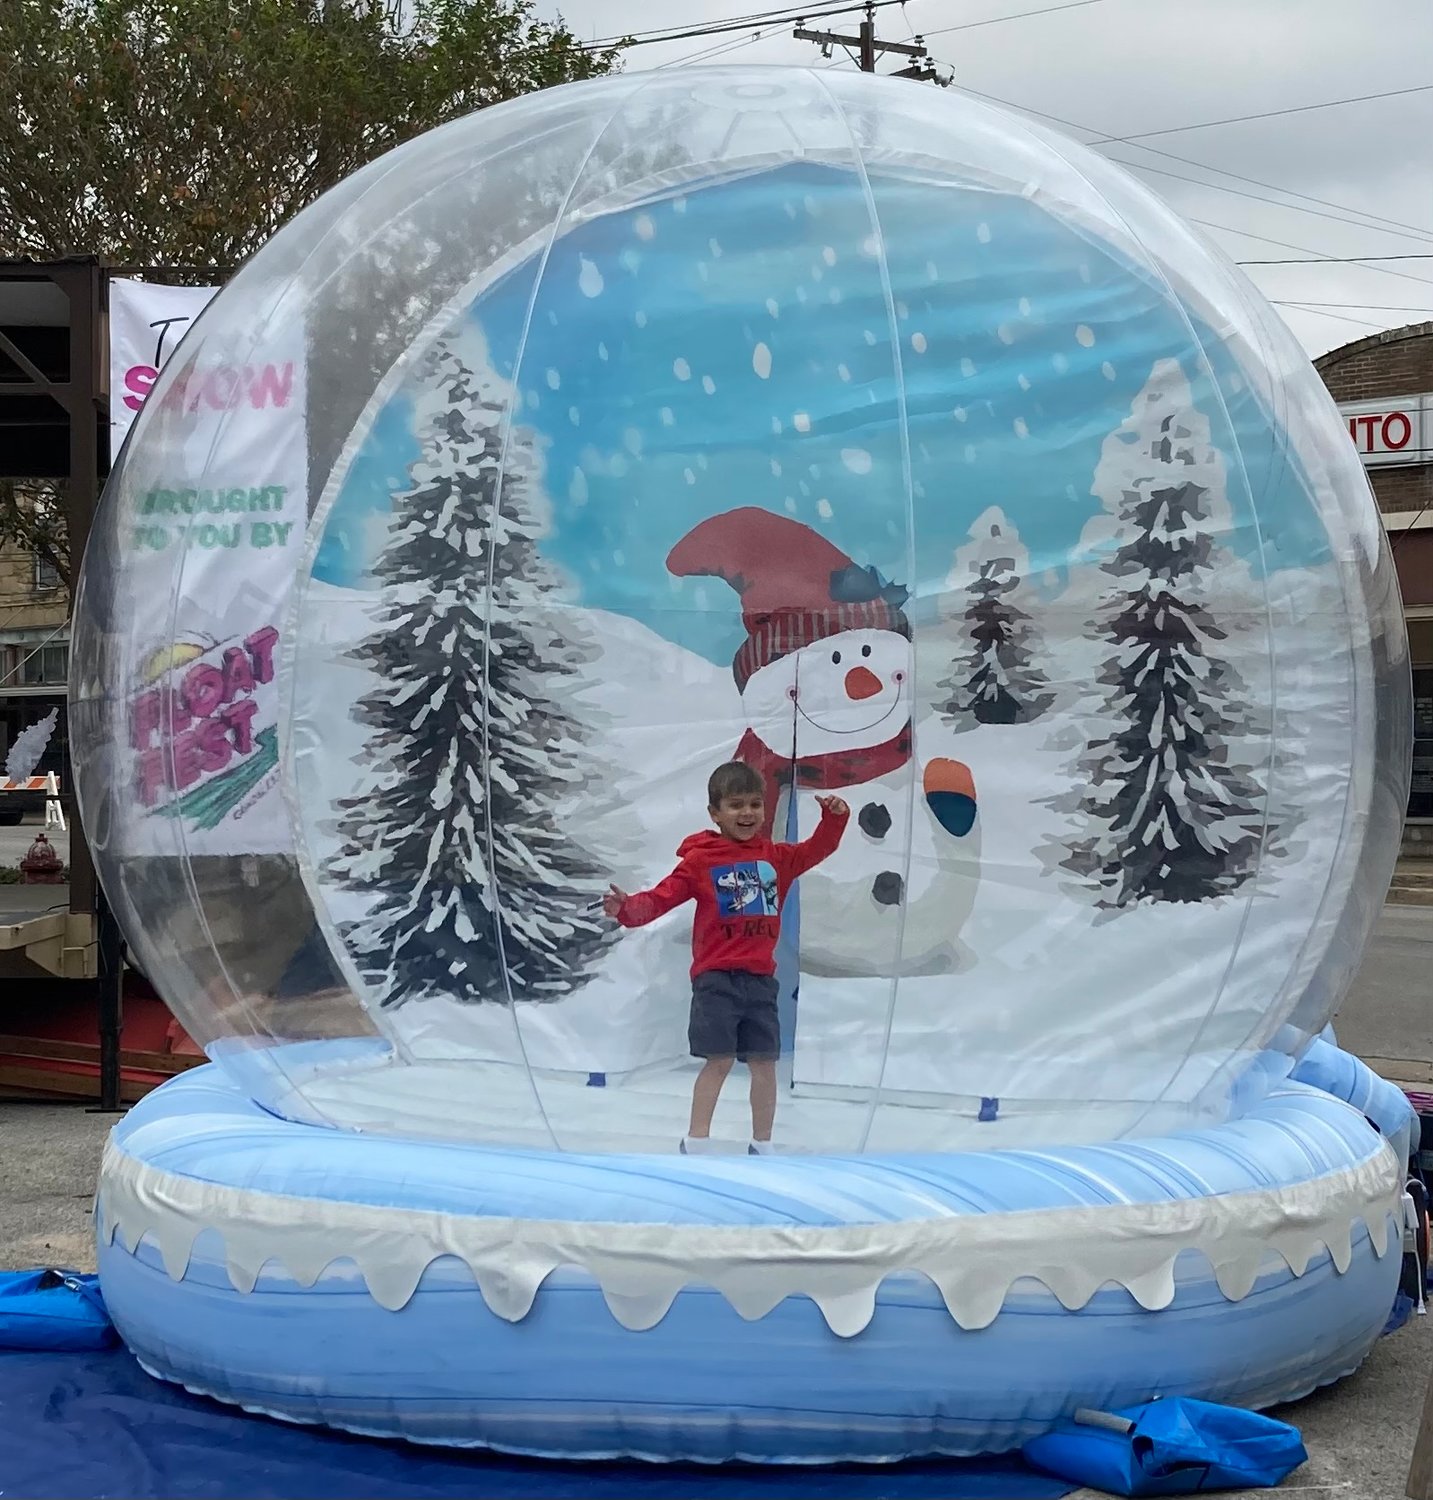 Last year, there was an inflatable snow globe at the Winterfest. This year, there will be other rides and games for kids, including a giant inflatable “snow mountain,” carousel swing and Candyland obstacle course.